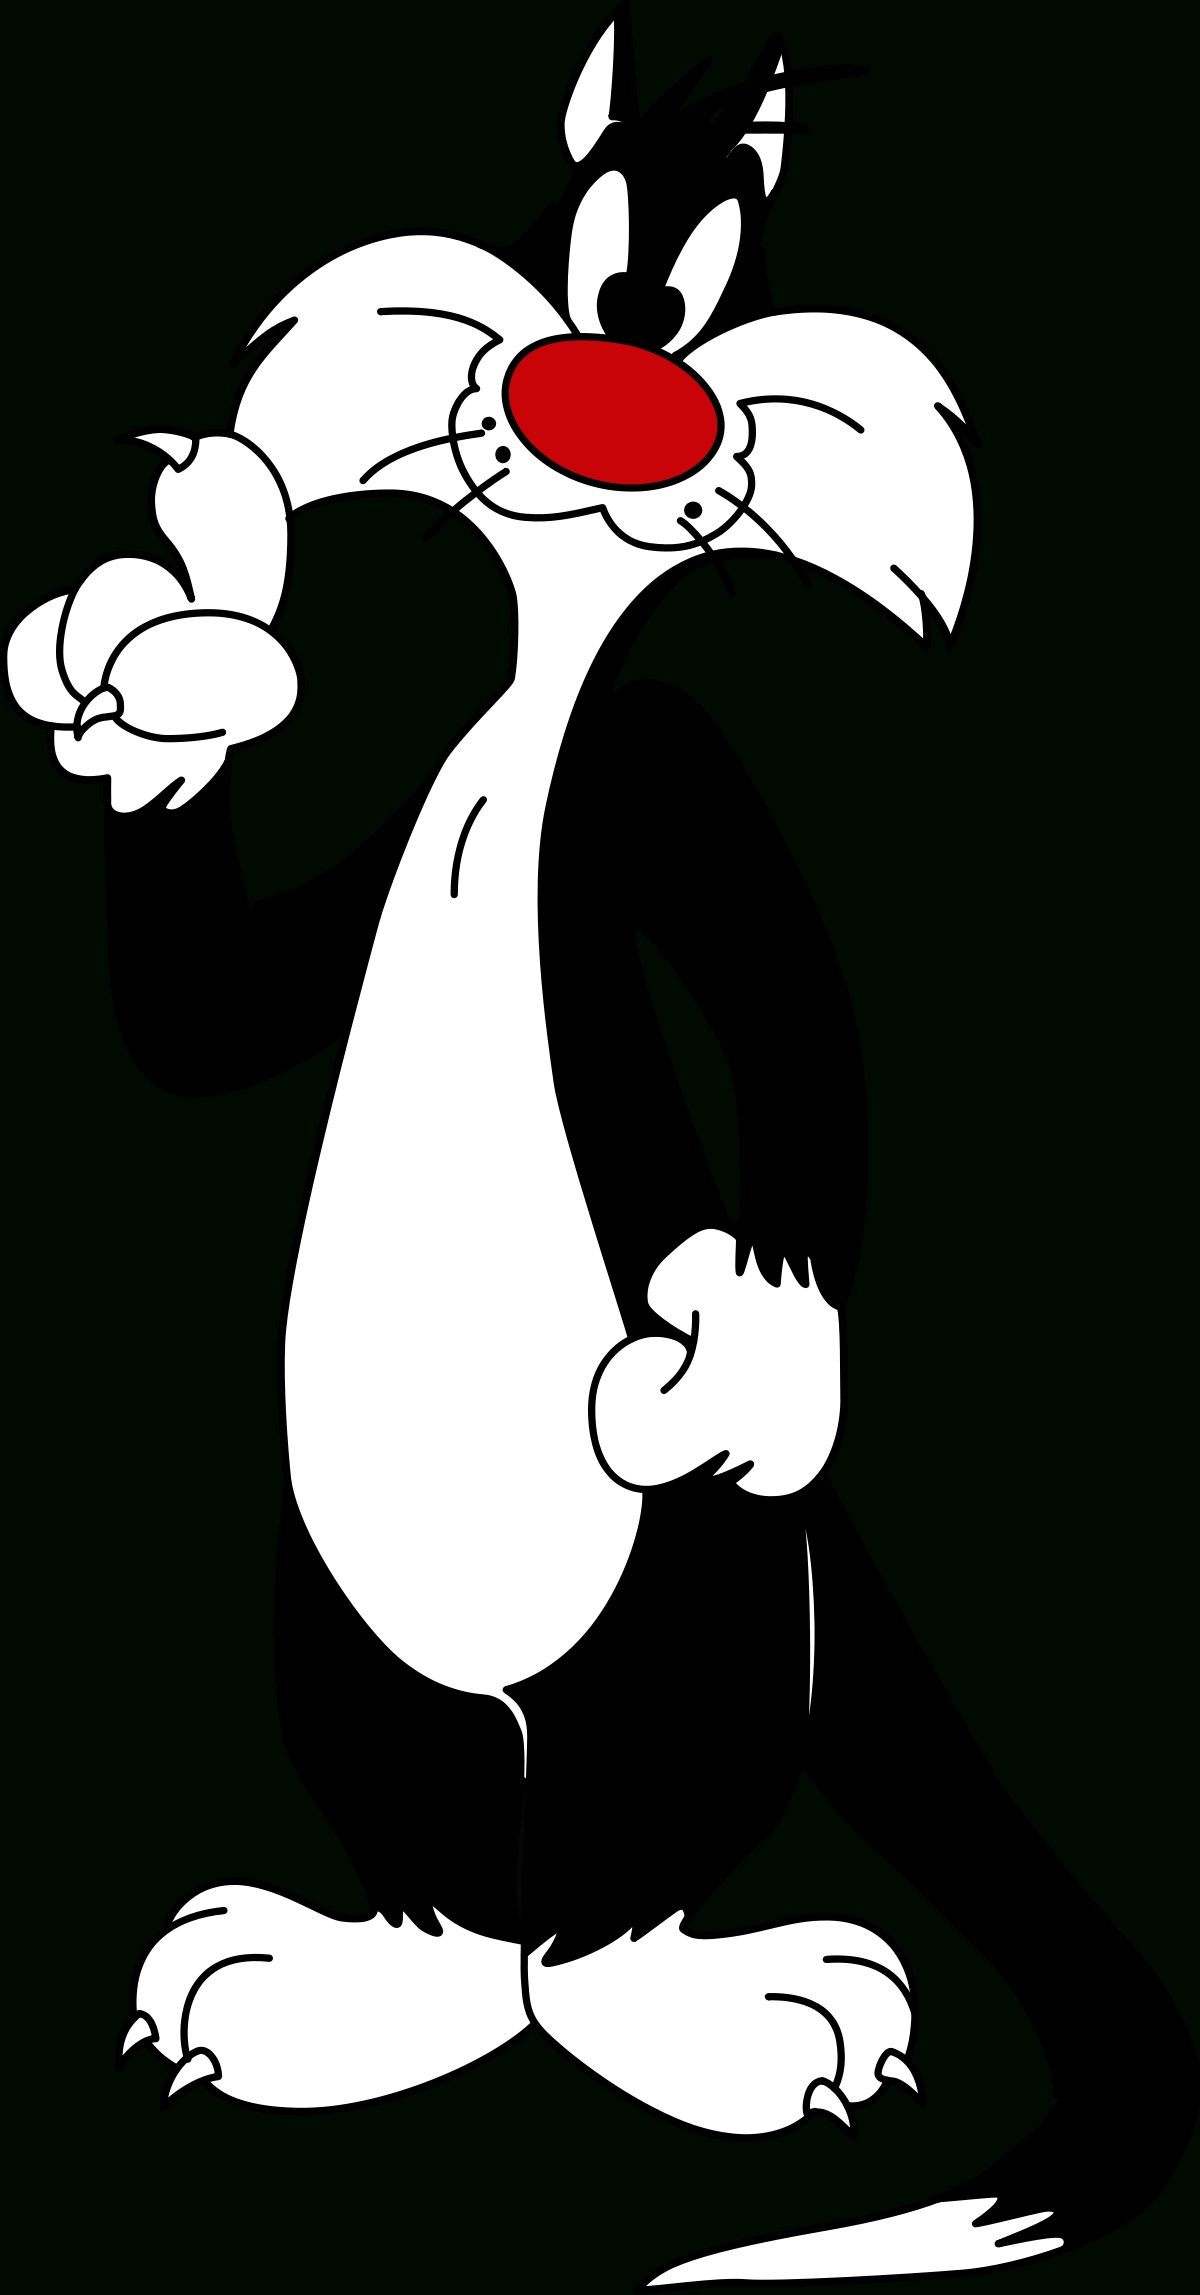 10 Most Popular Sylvester The Cat Images FULL HD 1920×1080 For PC Background